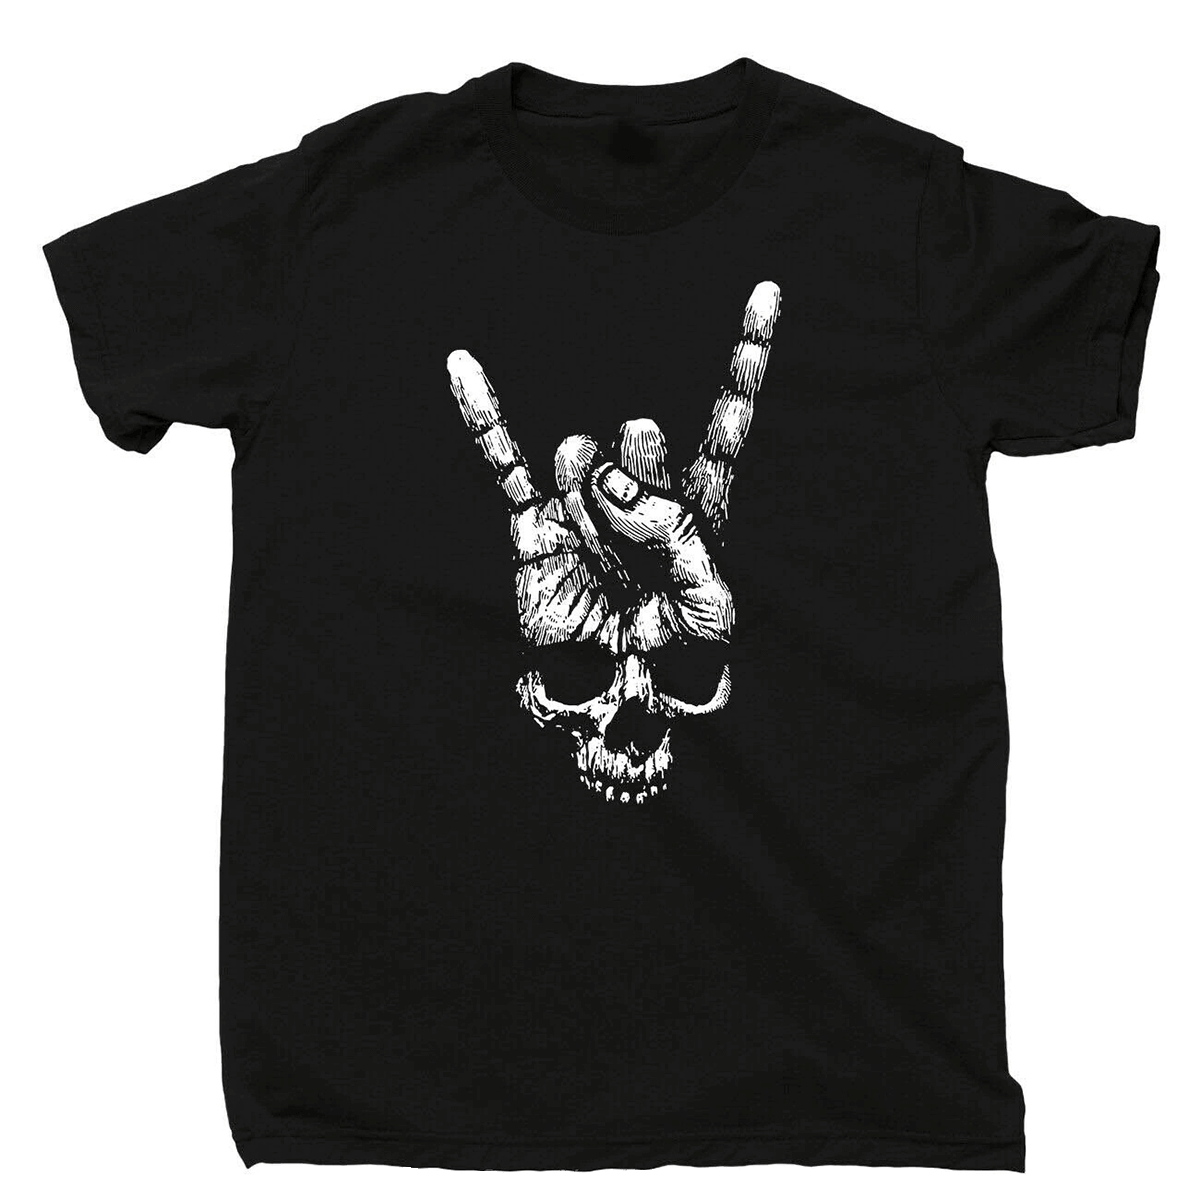 Skull Hand Sign Of The Horns T-Shirt / Rock Style Black Cotton T-shirt - HARD'N'HEAVY